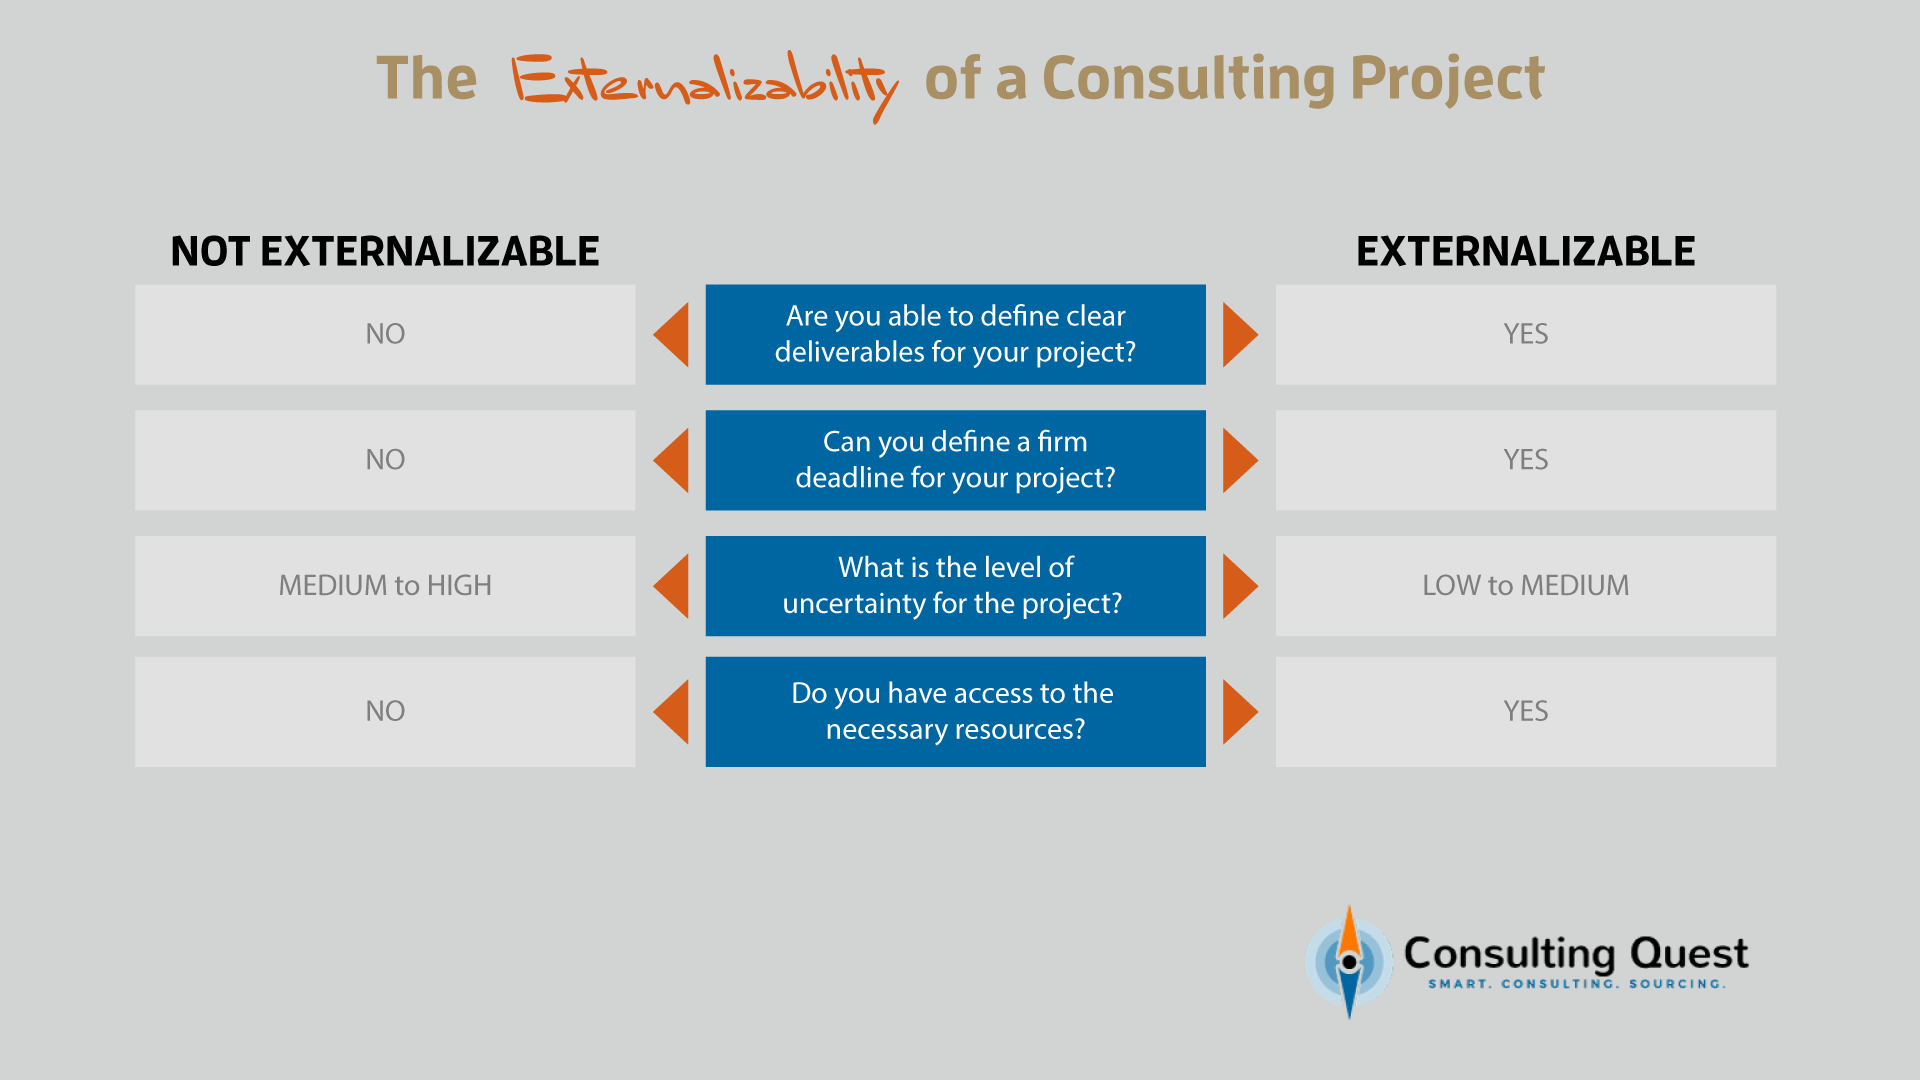 The externalizability of a consulting project